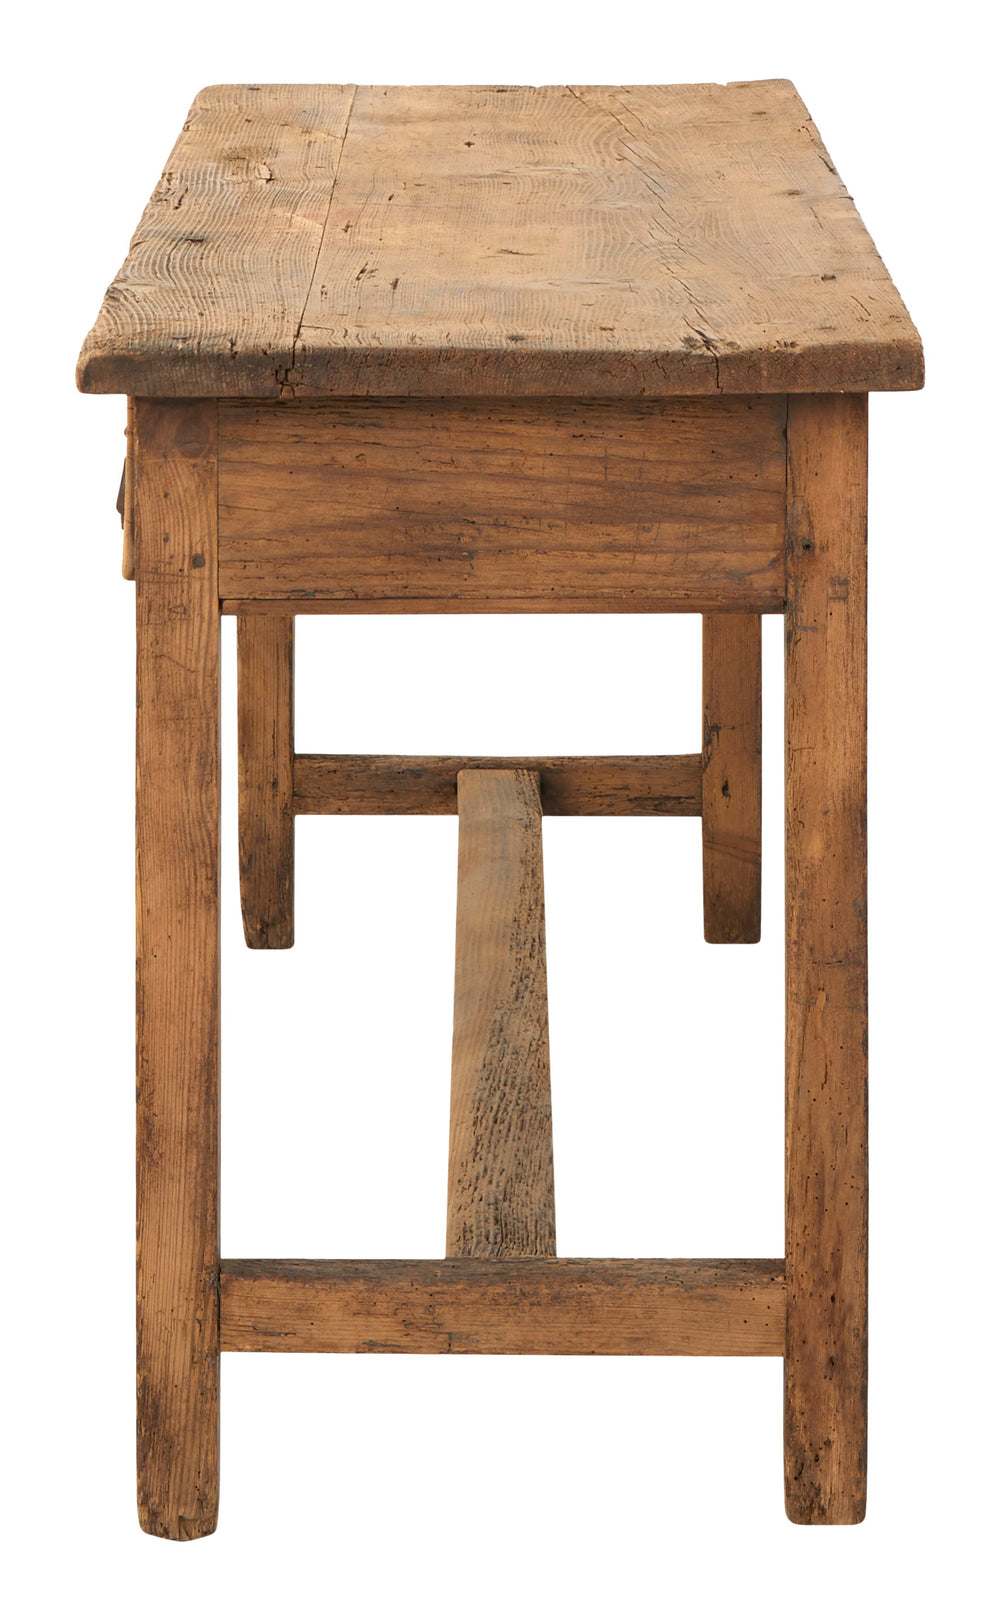 Antique Wood Console Table